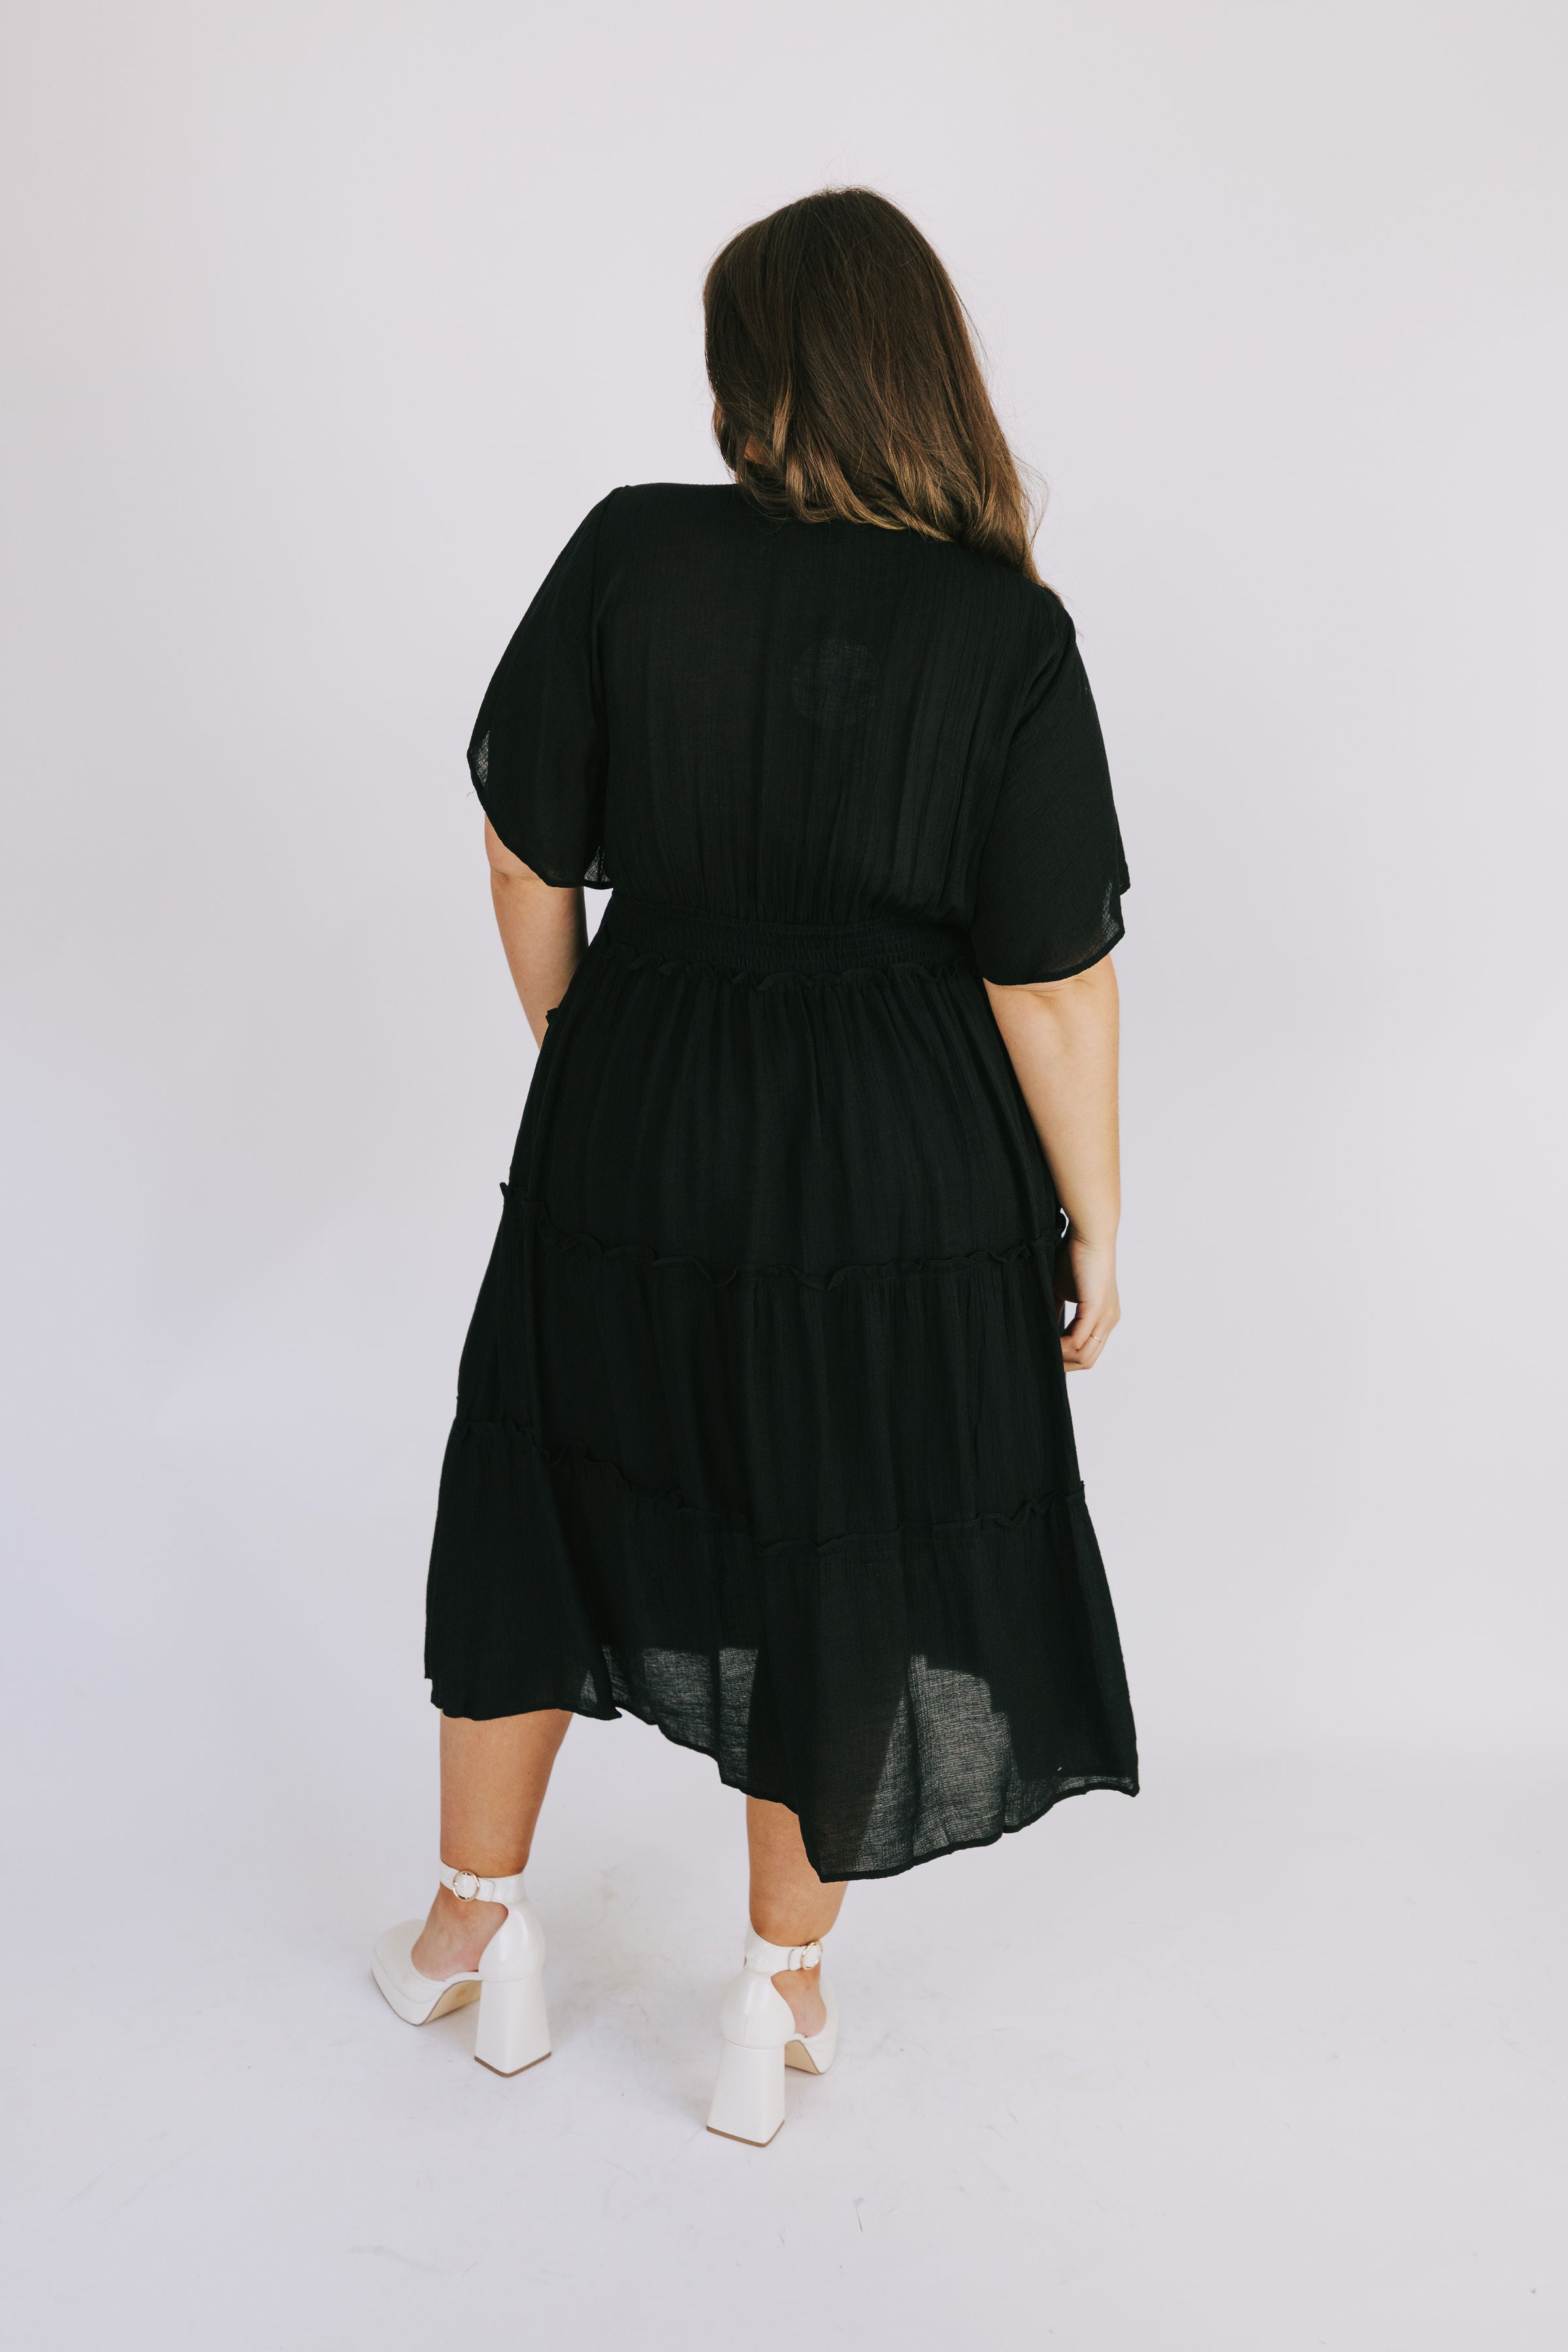 PLUS SIZE - Speed Of Sound Dress - 2 Colors!